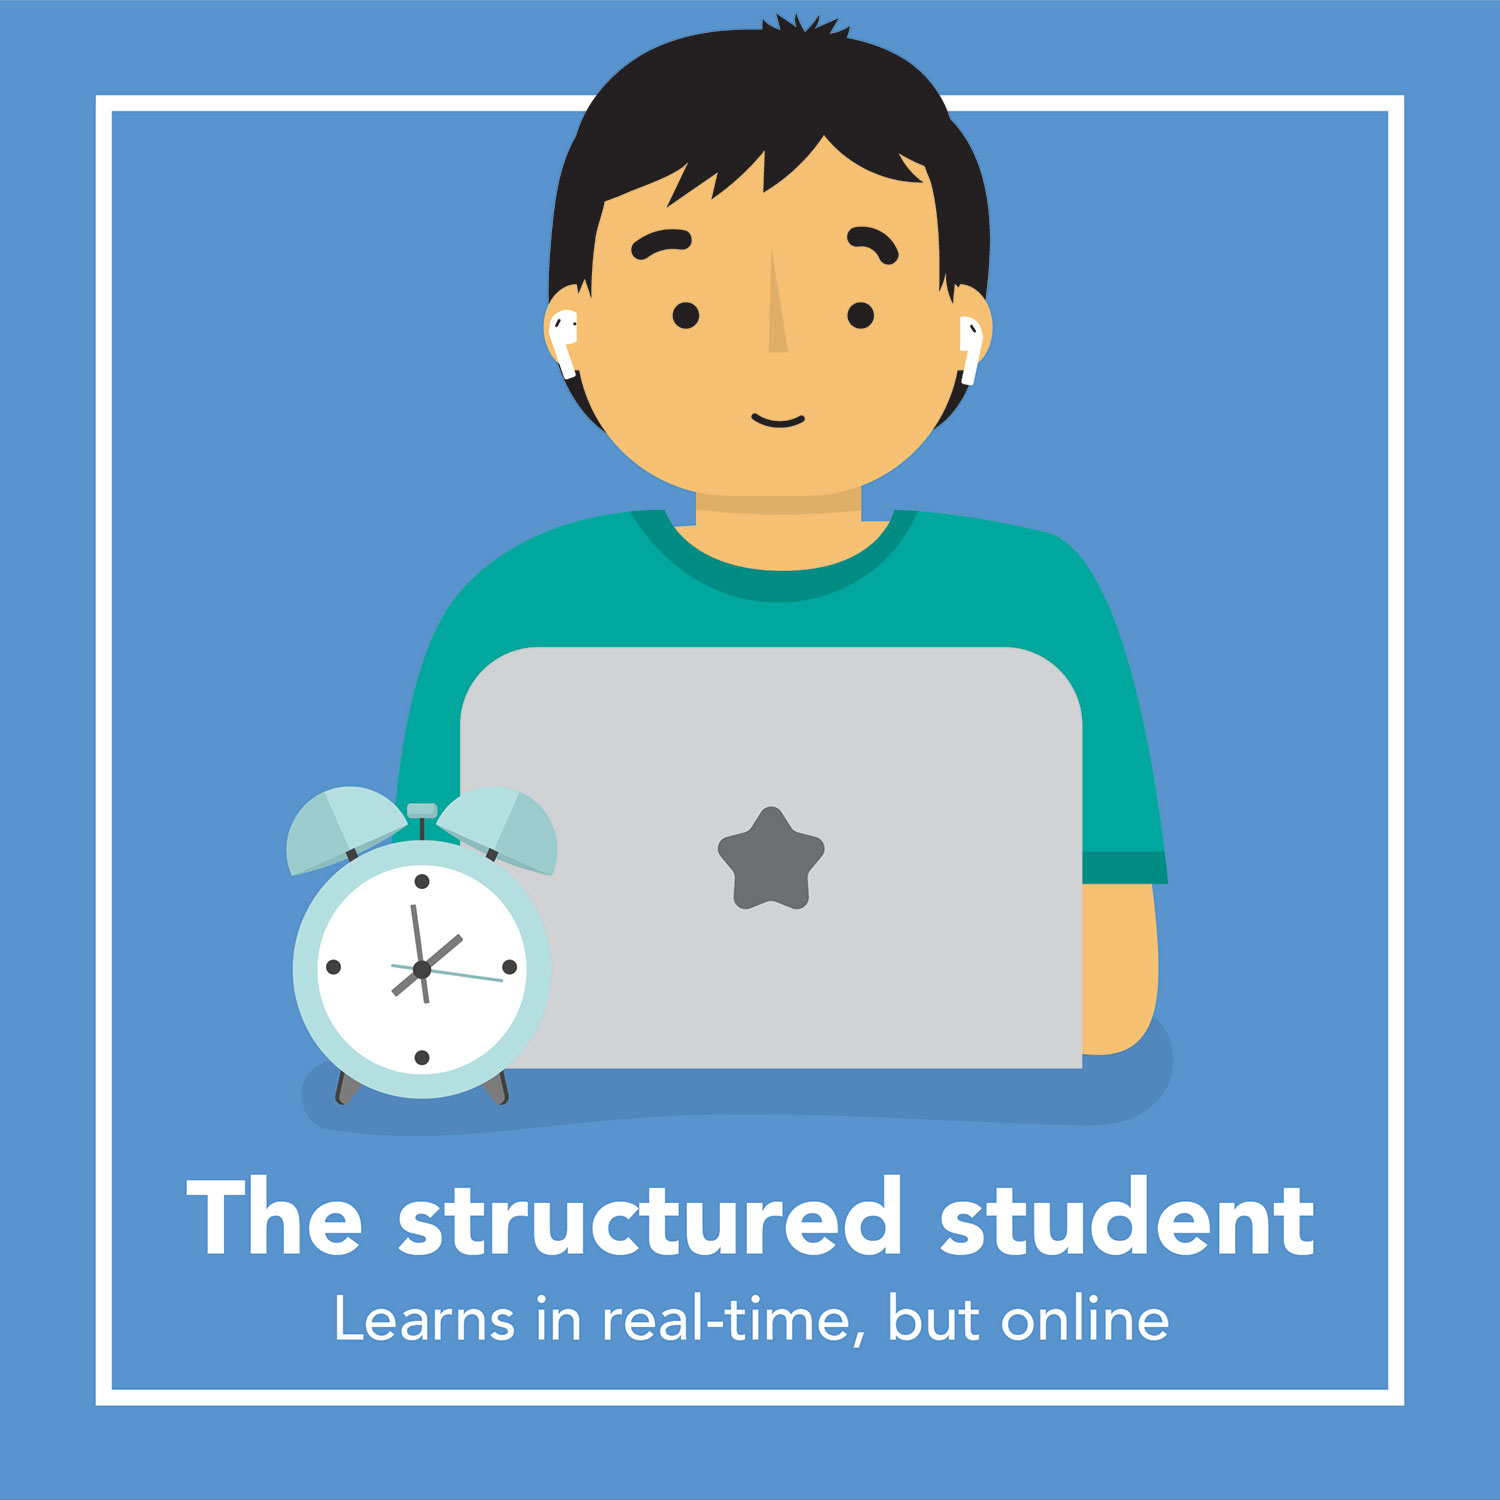 the structured student - learn in real-time, but online